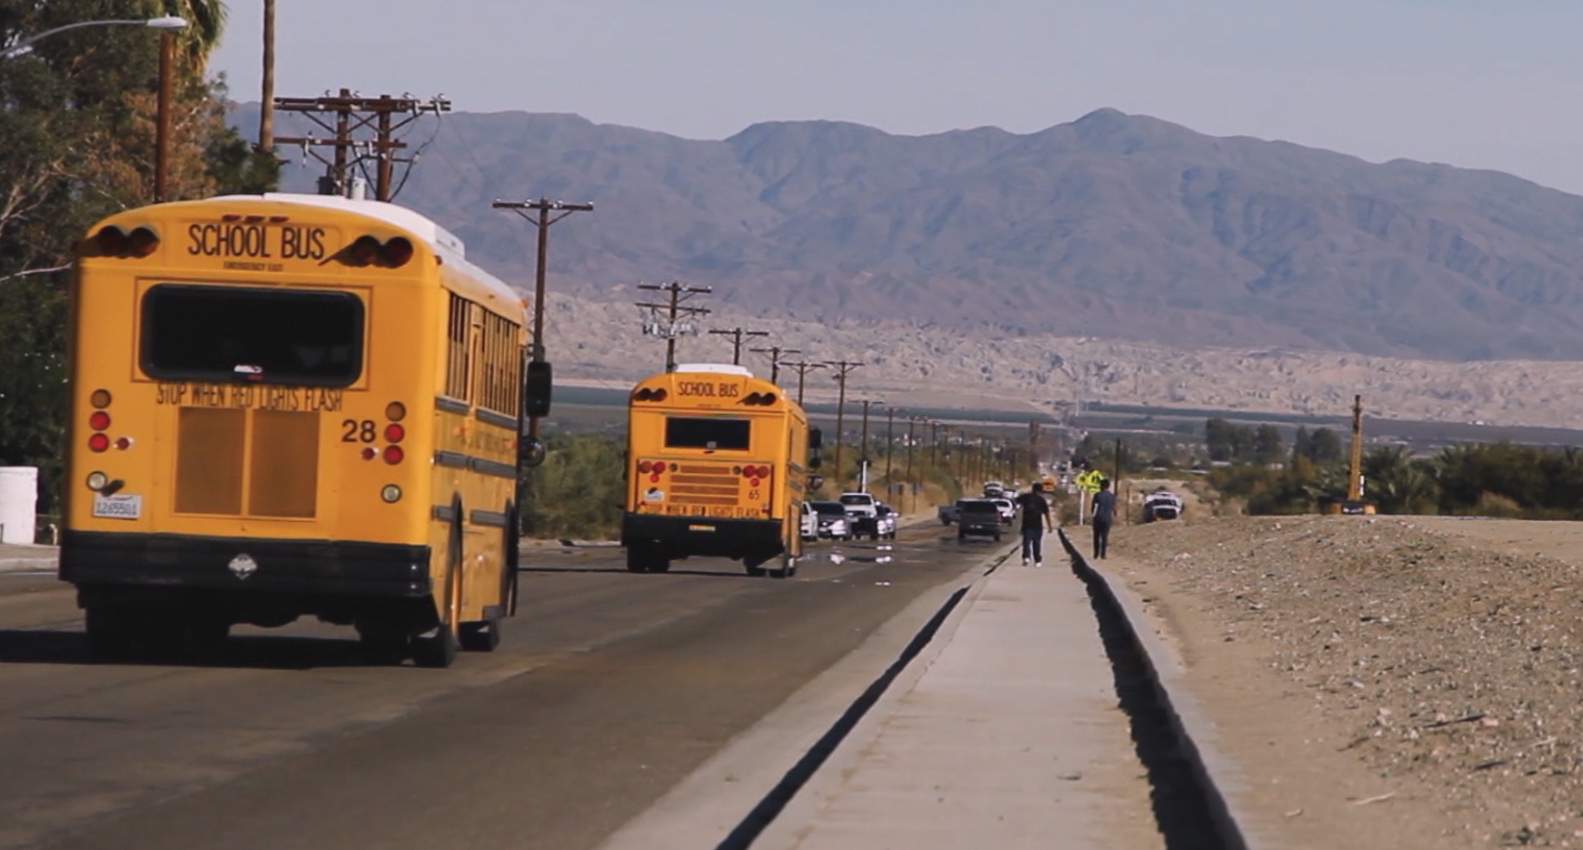 In Coachella Valley, CA., routers have been placed on school buses to enable students to do homework coming and going from school. Photo: PBS NewsHour